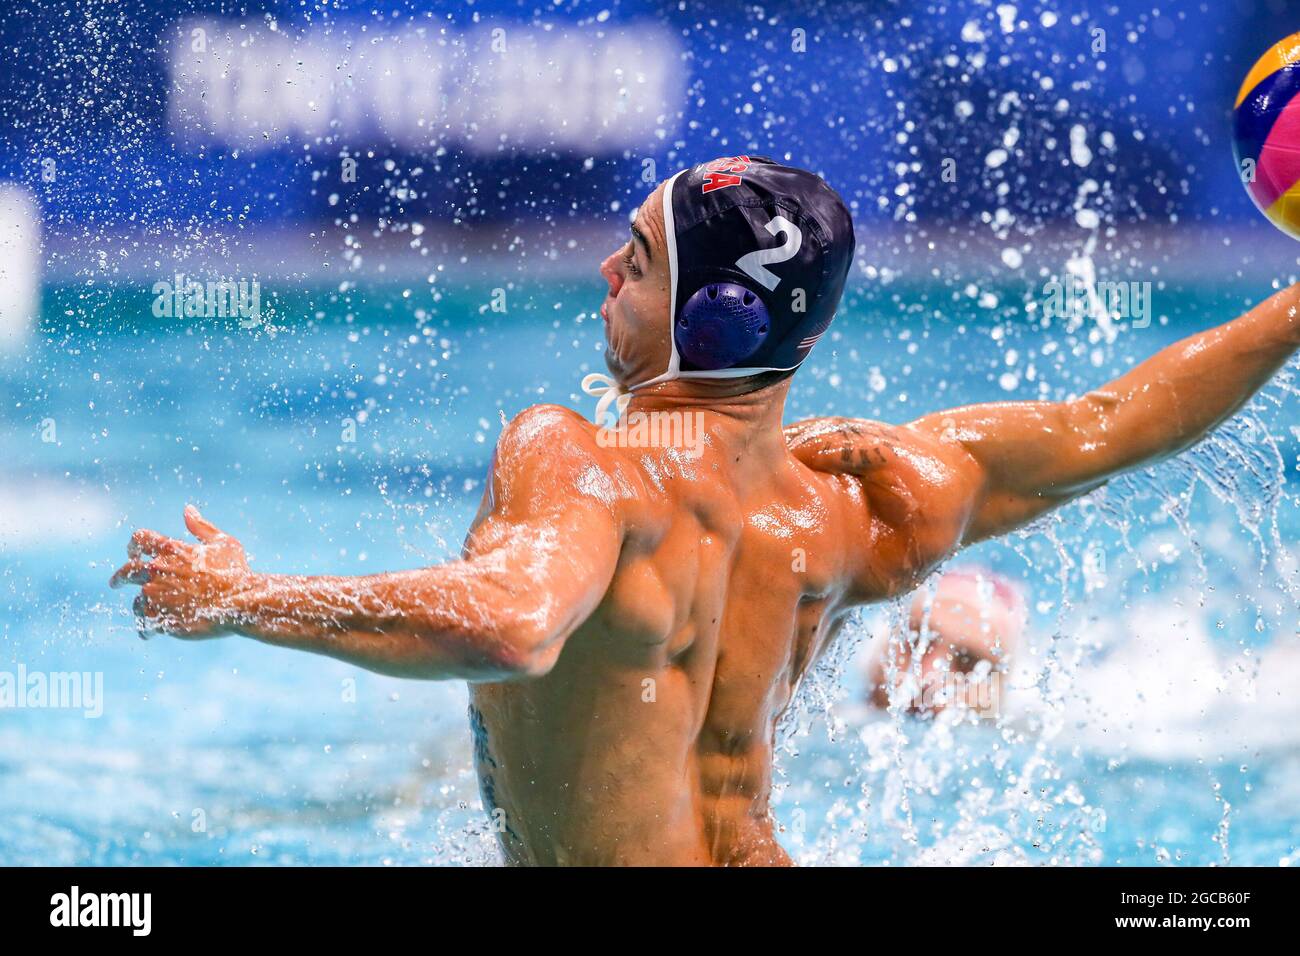 Olympic Water Polo, Water Polo